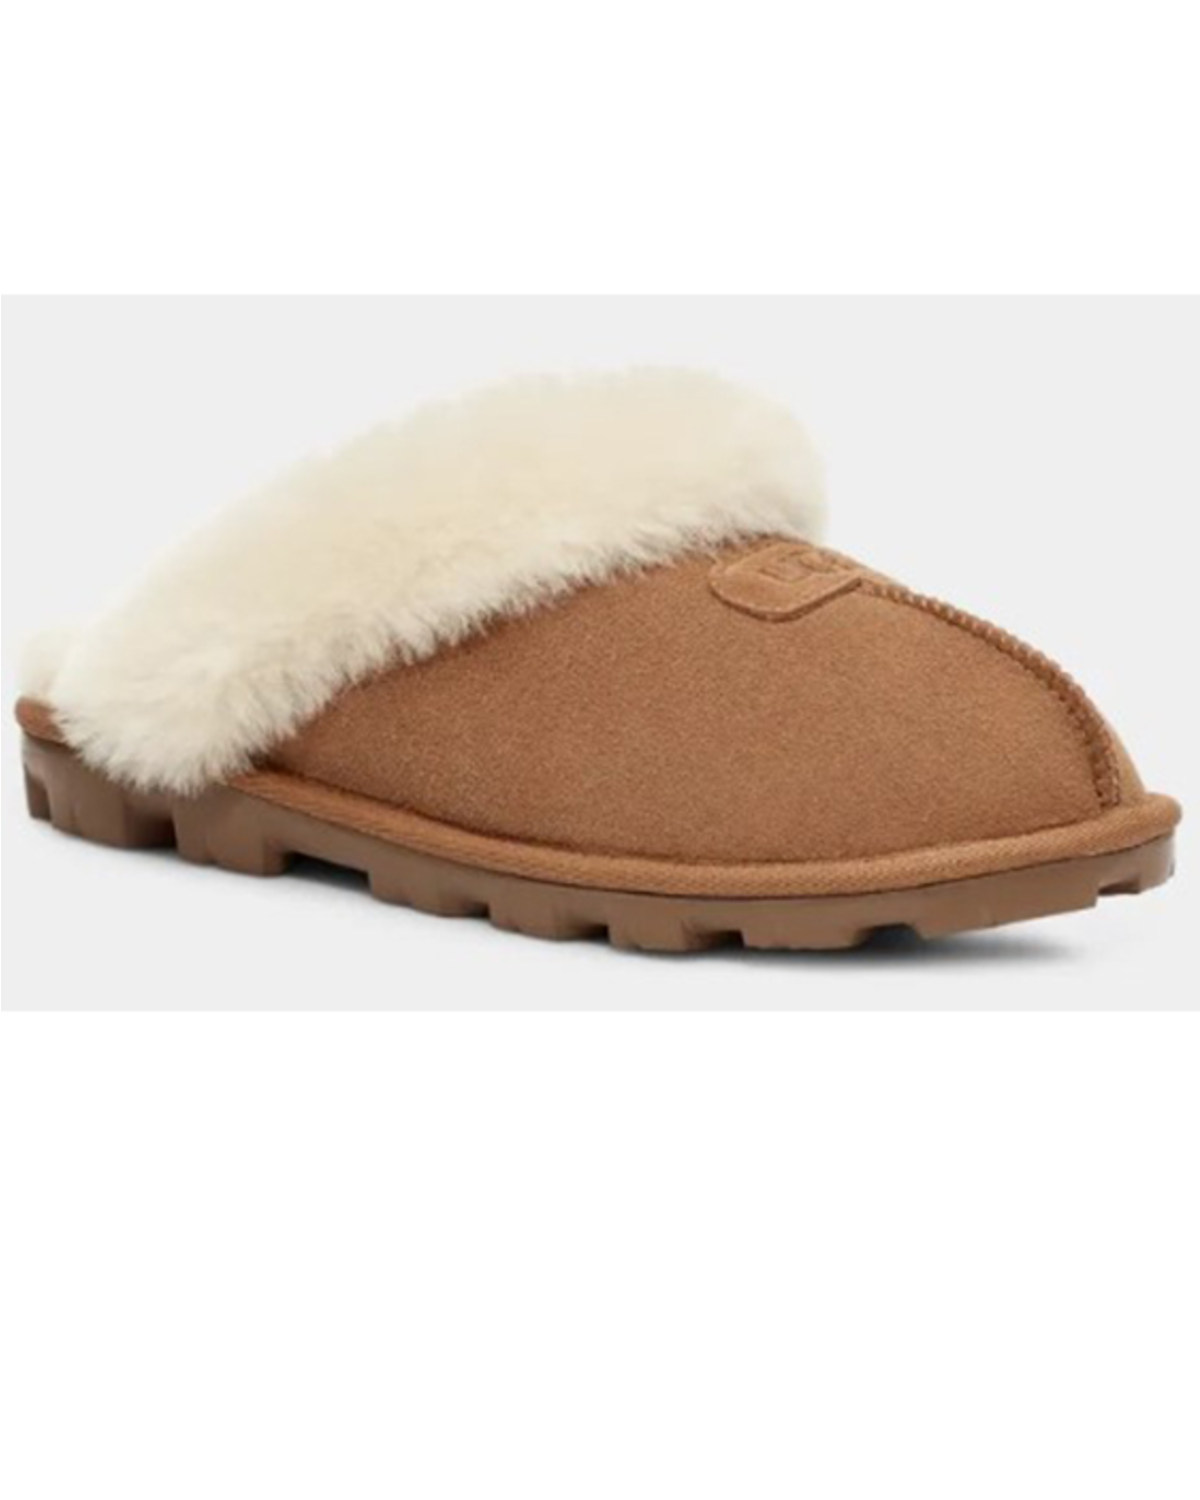 UGG Women's Coquette Slippers - Round Toe